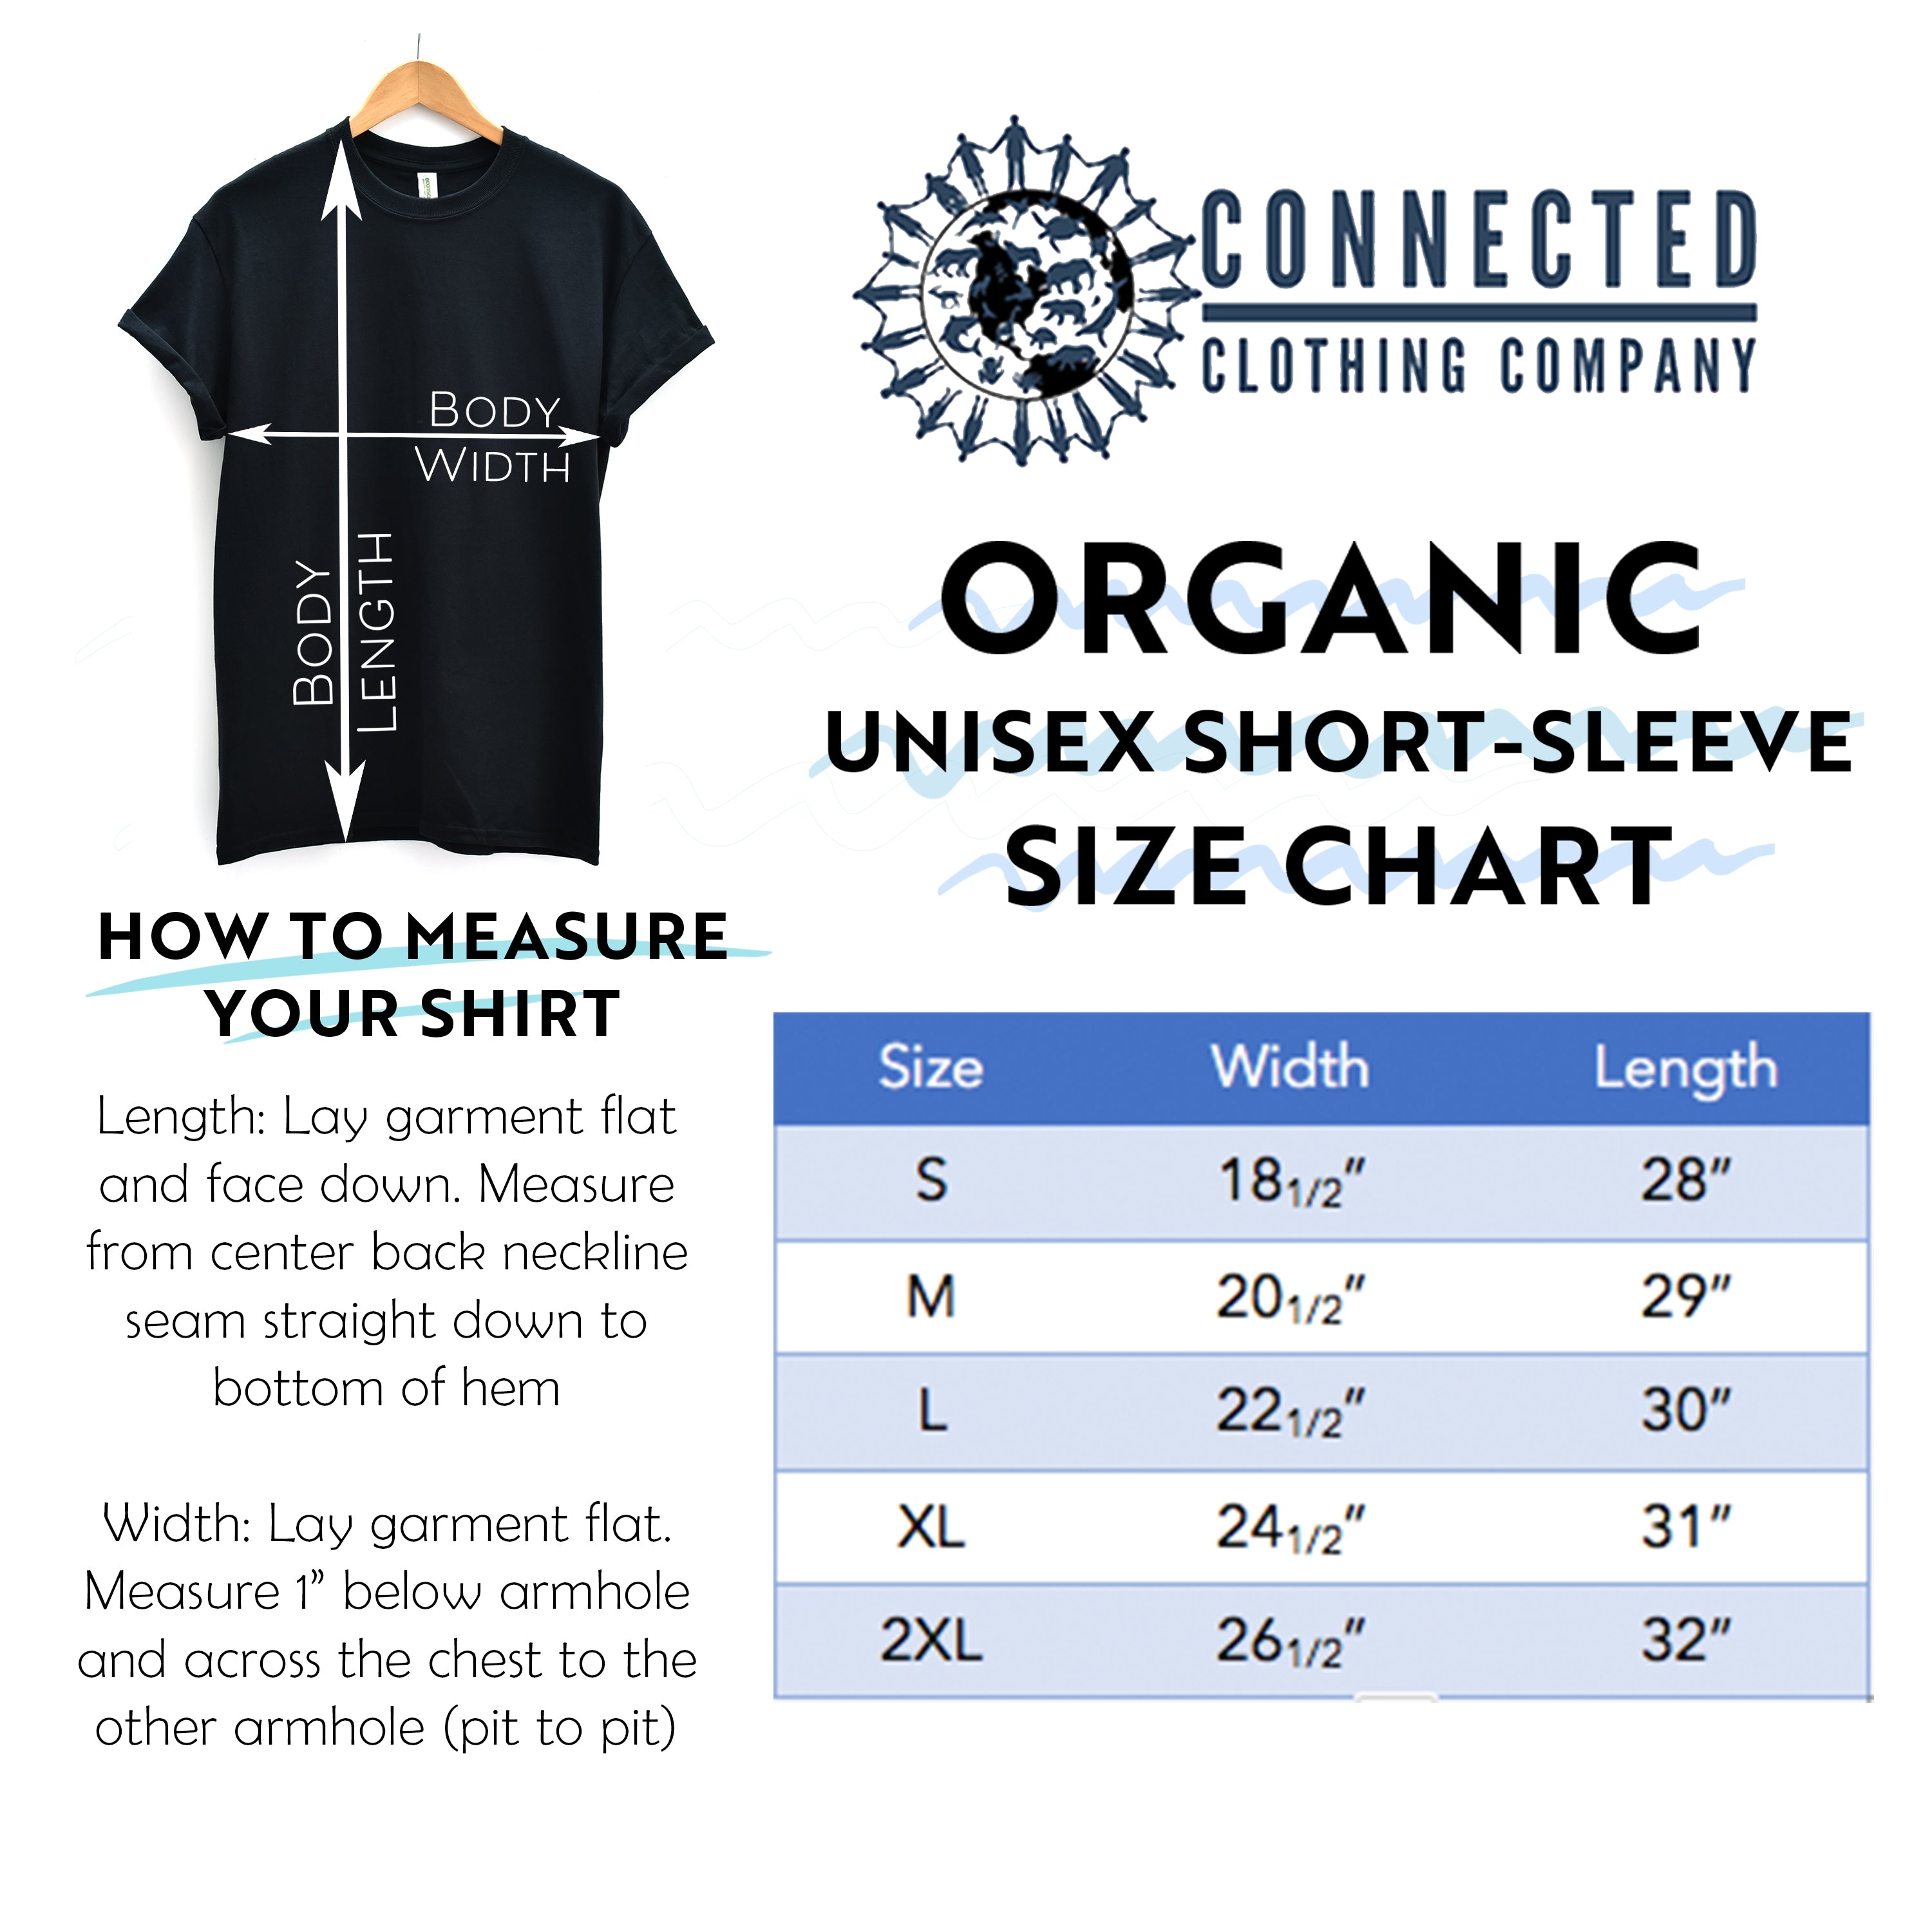 Organic Cotton Unisex Short-Sleeve Tee Size Chart - sweetsherriloudesigns - Ethically and Sustainably Made - 10% donated to Mission Blue ocean conservation